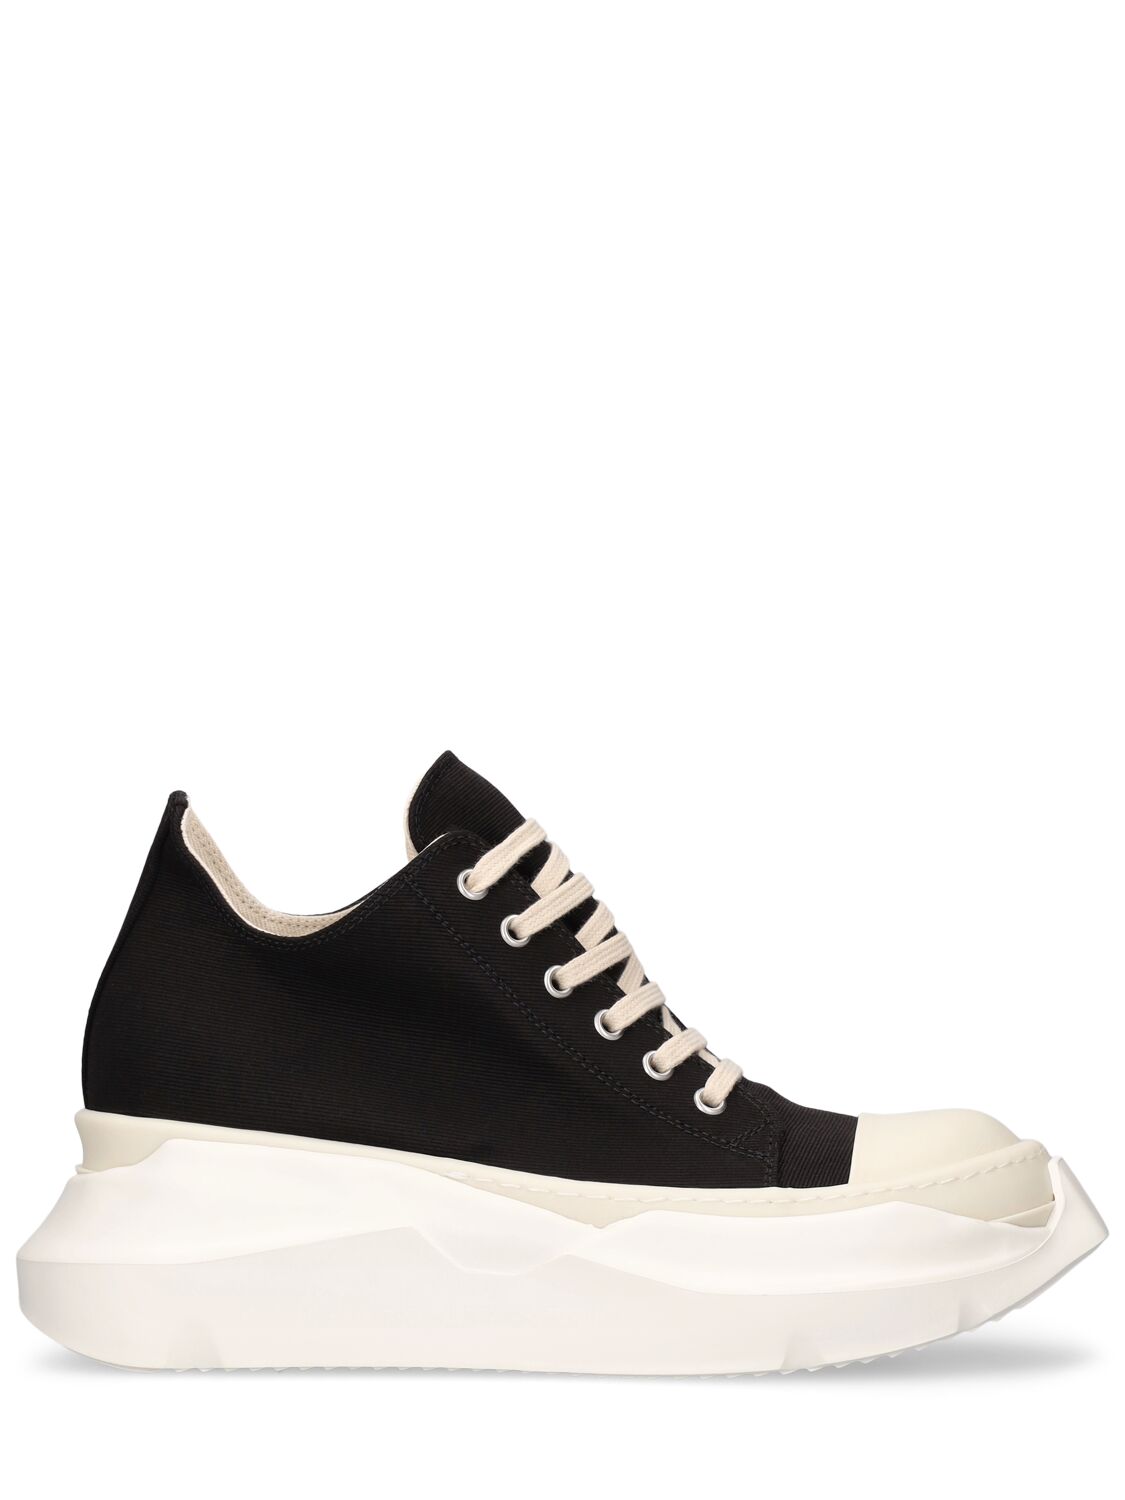 Abstract Canvas Low Sneakers